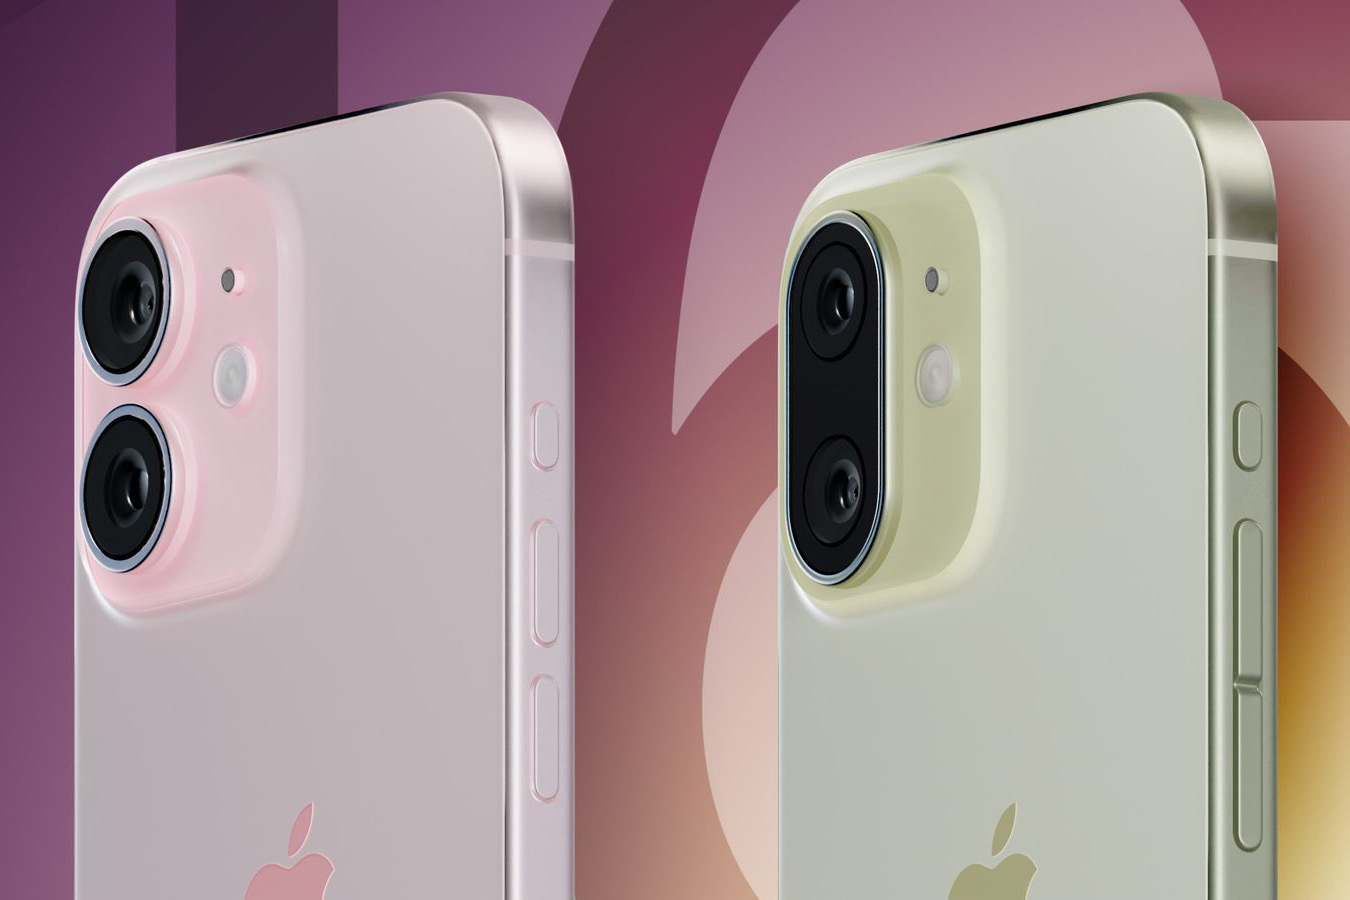 iPhone 16 Pro, iPhone 16 Pro Max To Feature Smaller Dynamic Island, Bigger  Displays And Revamped Cameras, According To Fresh Renders